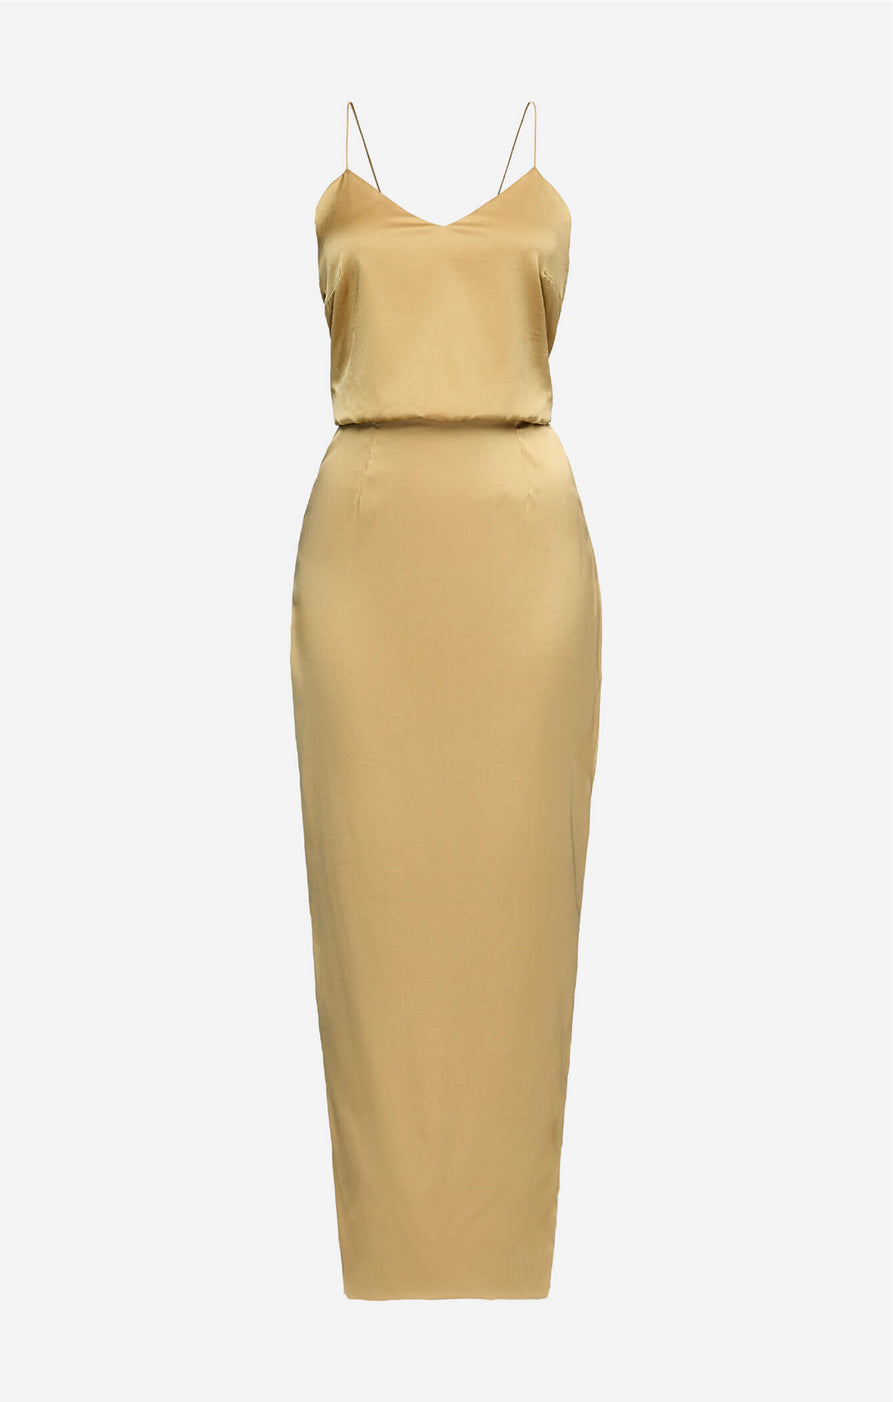 THE SILK CLASSIC DRESS - GOLD – All Things Golden